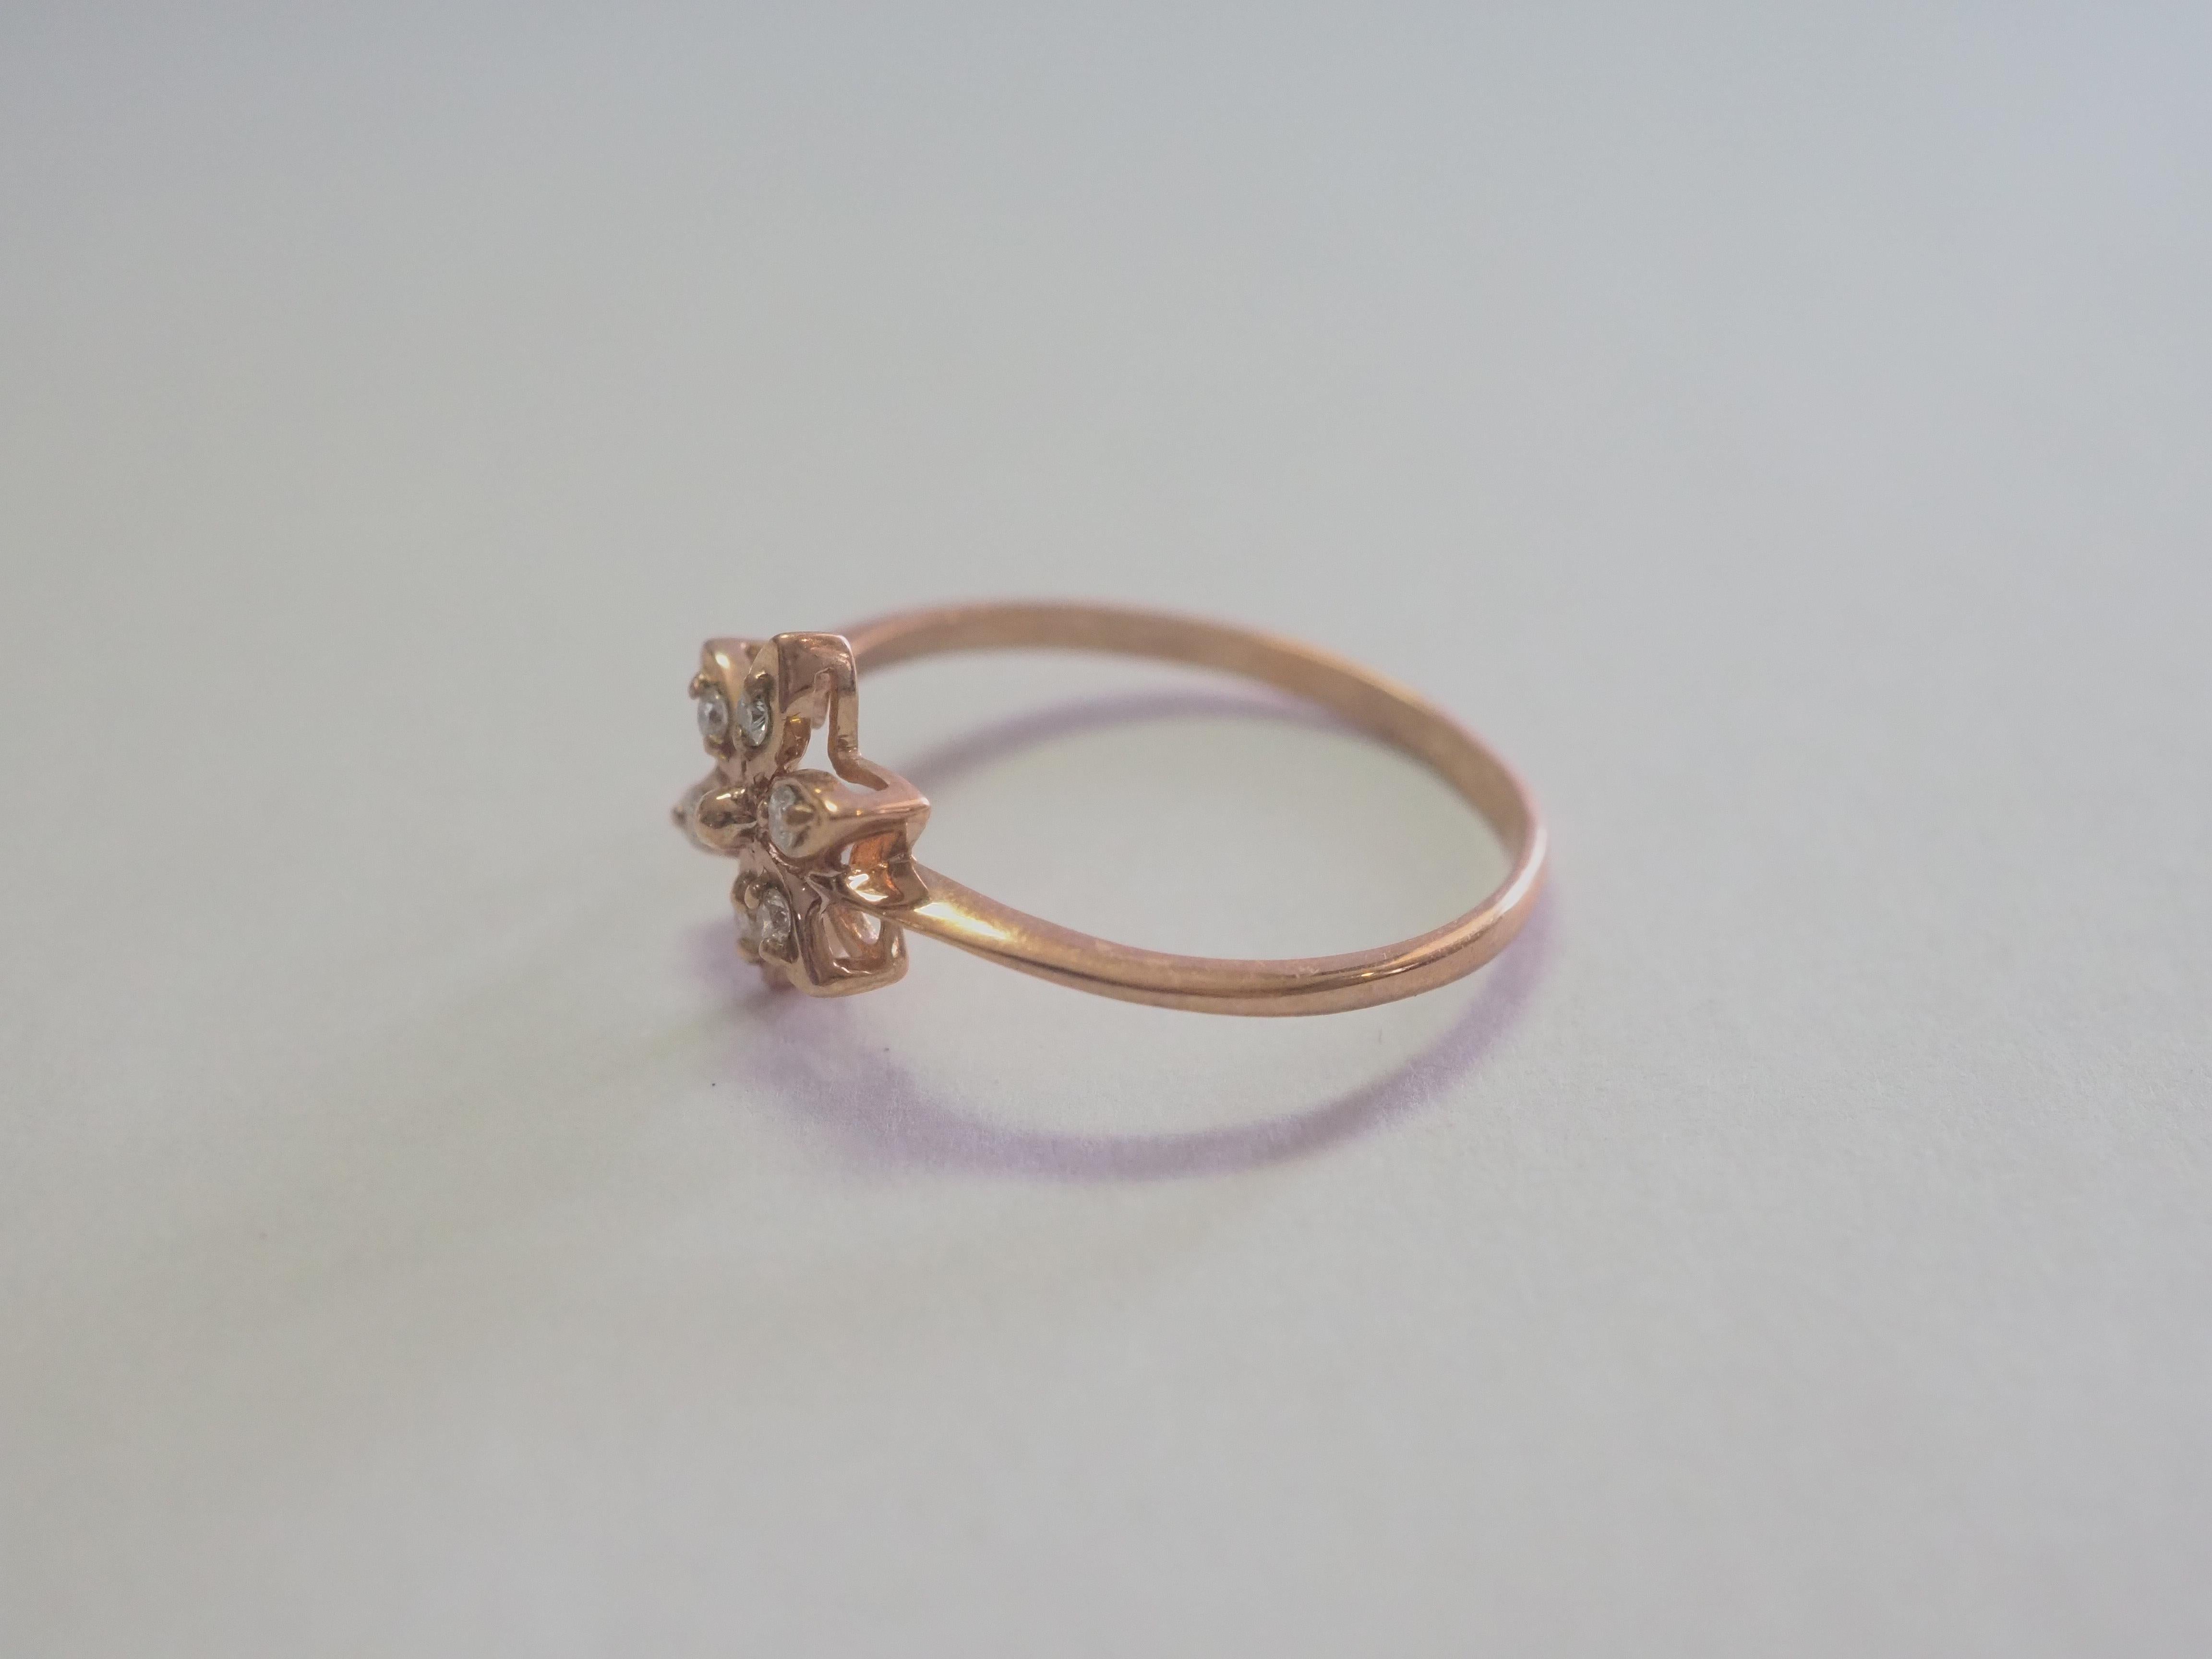 This fine dainty band ring piece is perfect for wearing everyday. There are a total of six round and bright diamonds set inside. The diamonds are very clear and bright. The design is a contemporary with flower design. The design has femineity and